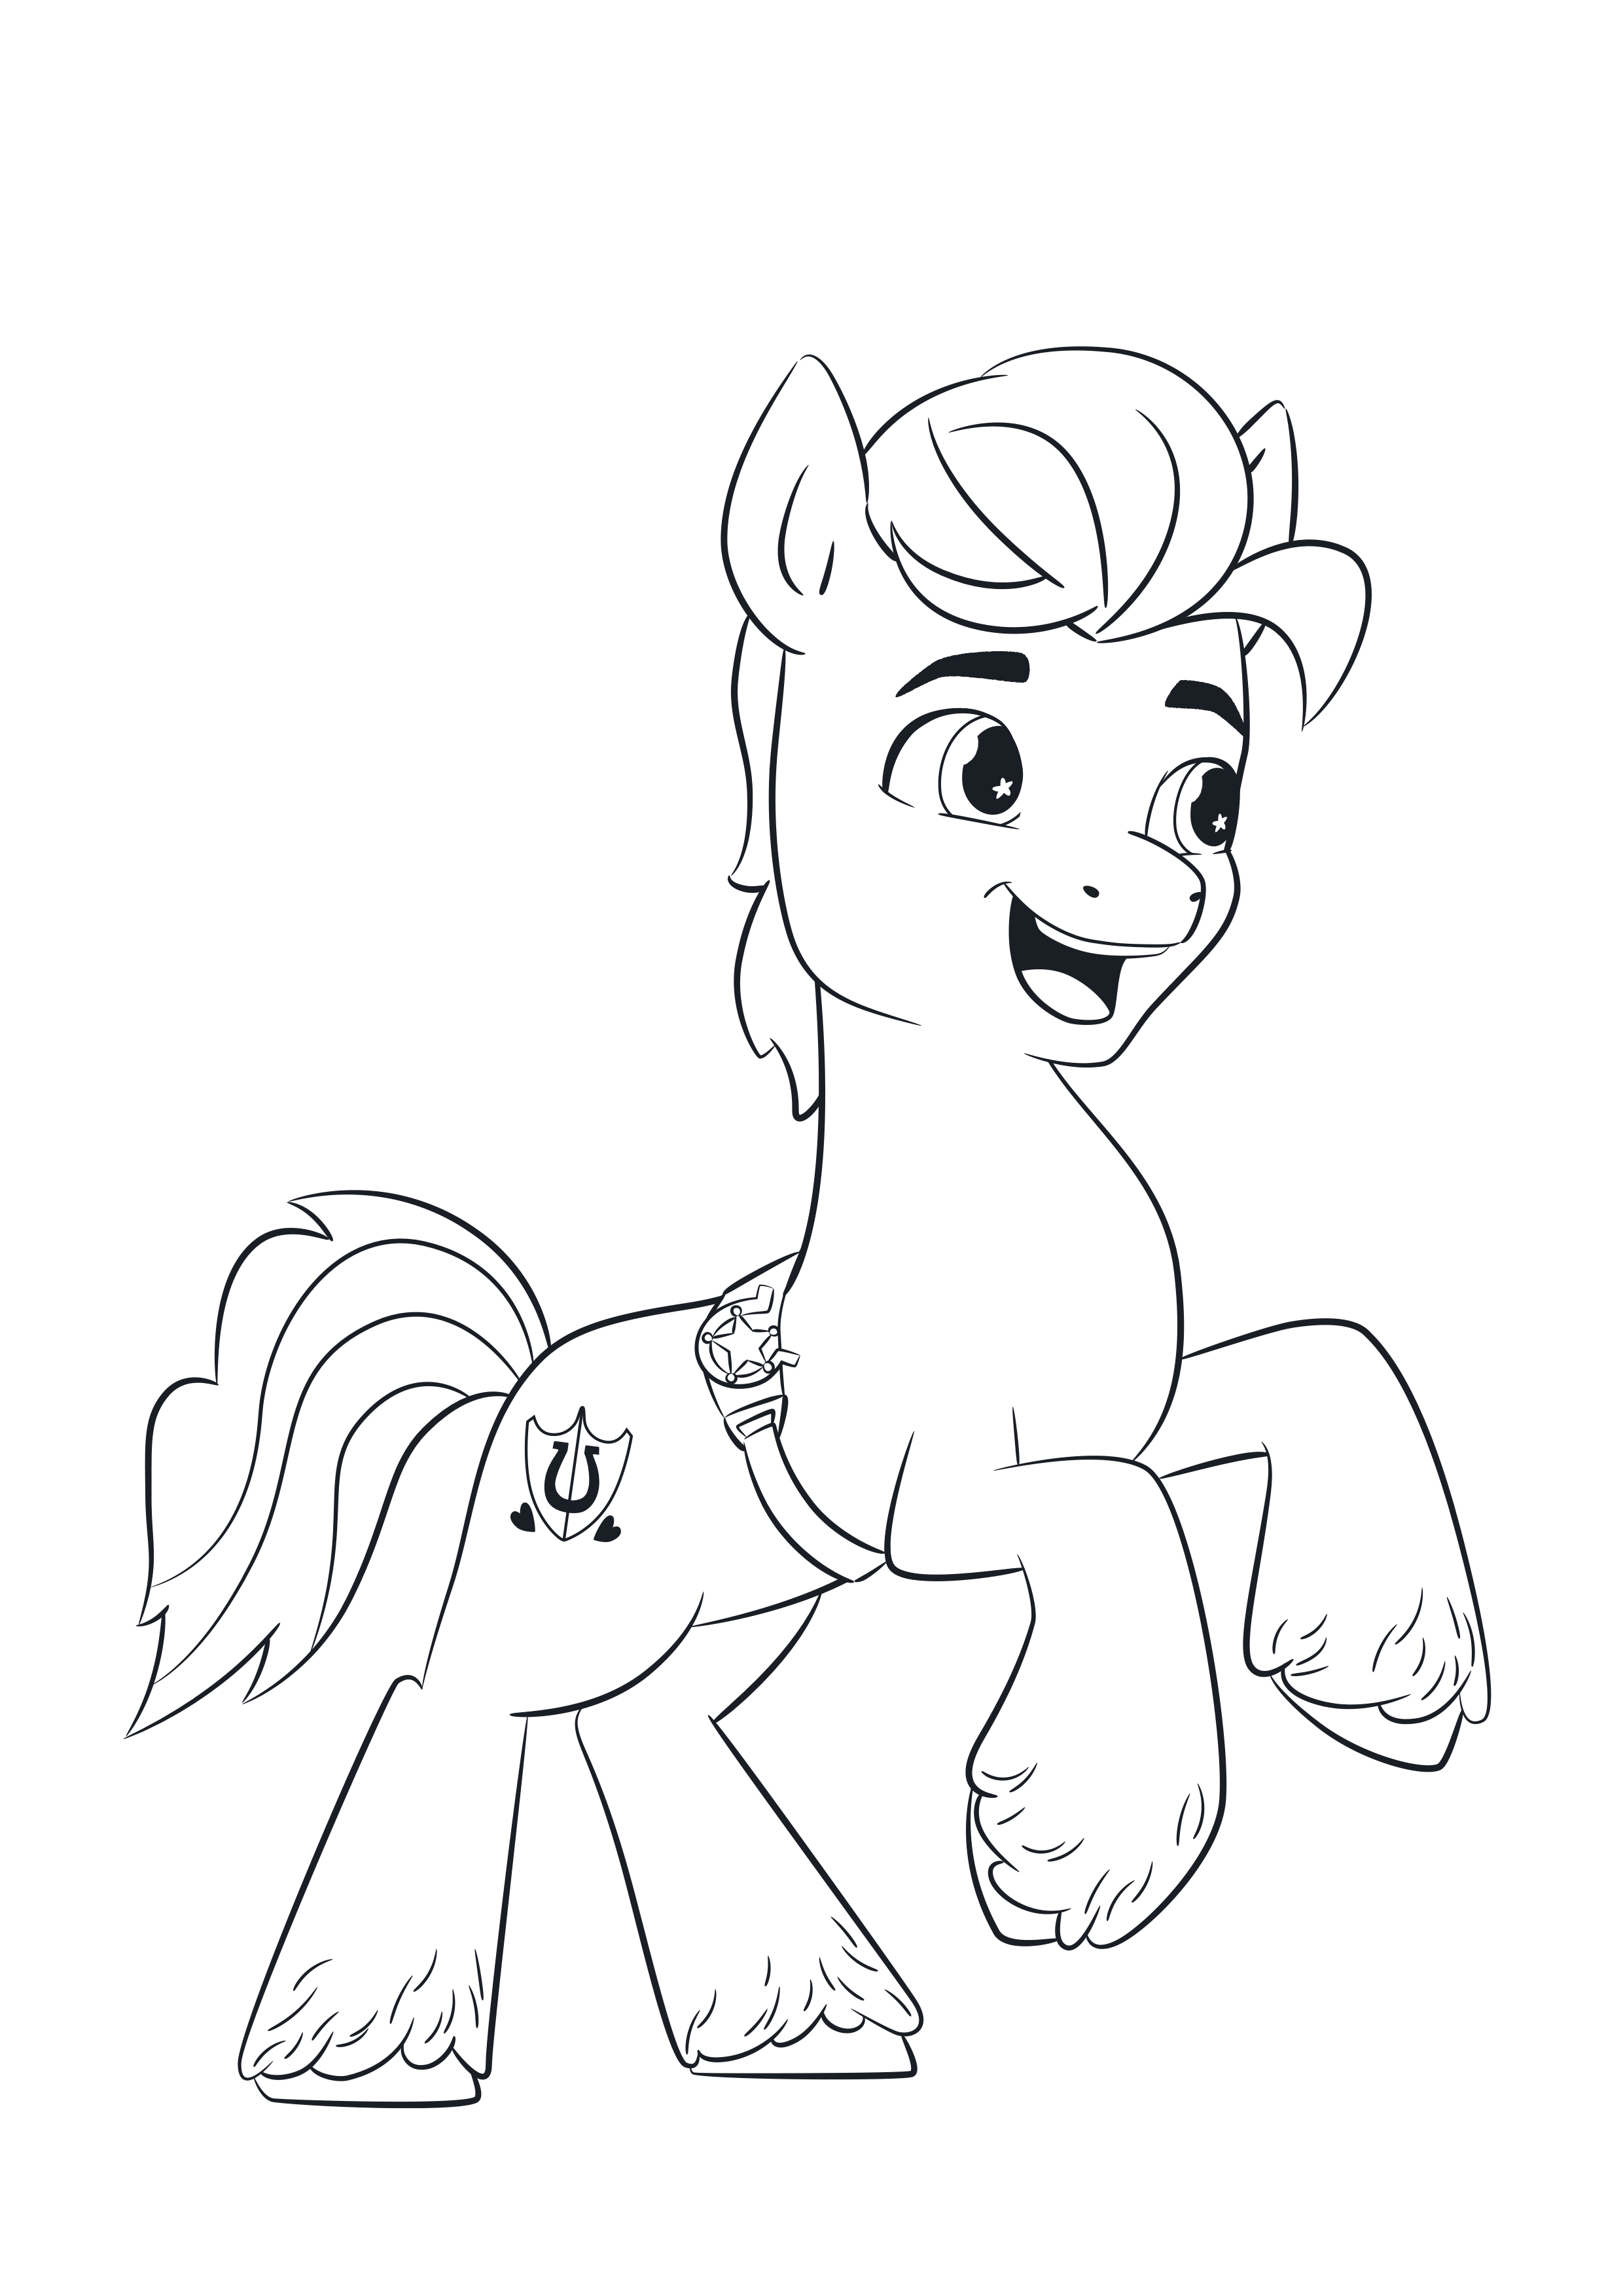 My Little Pony: A New Generation movie coloring pages - YouLoveIt.com